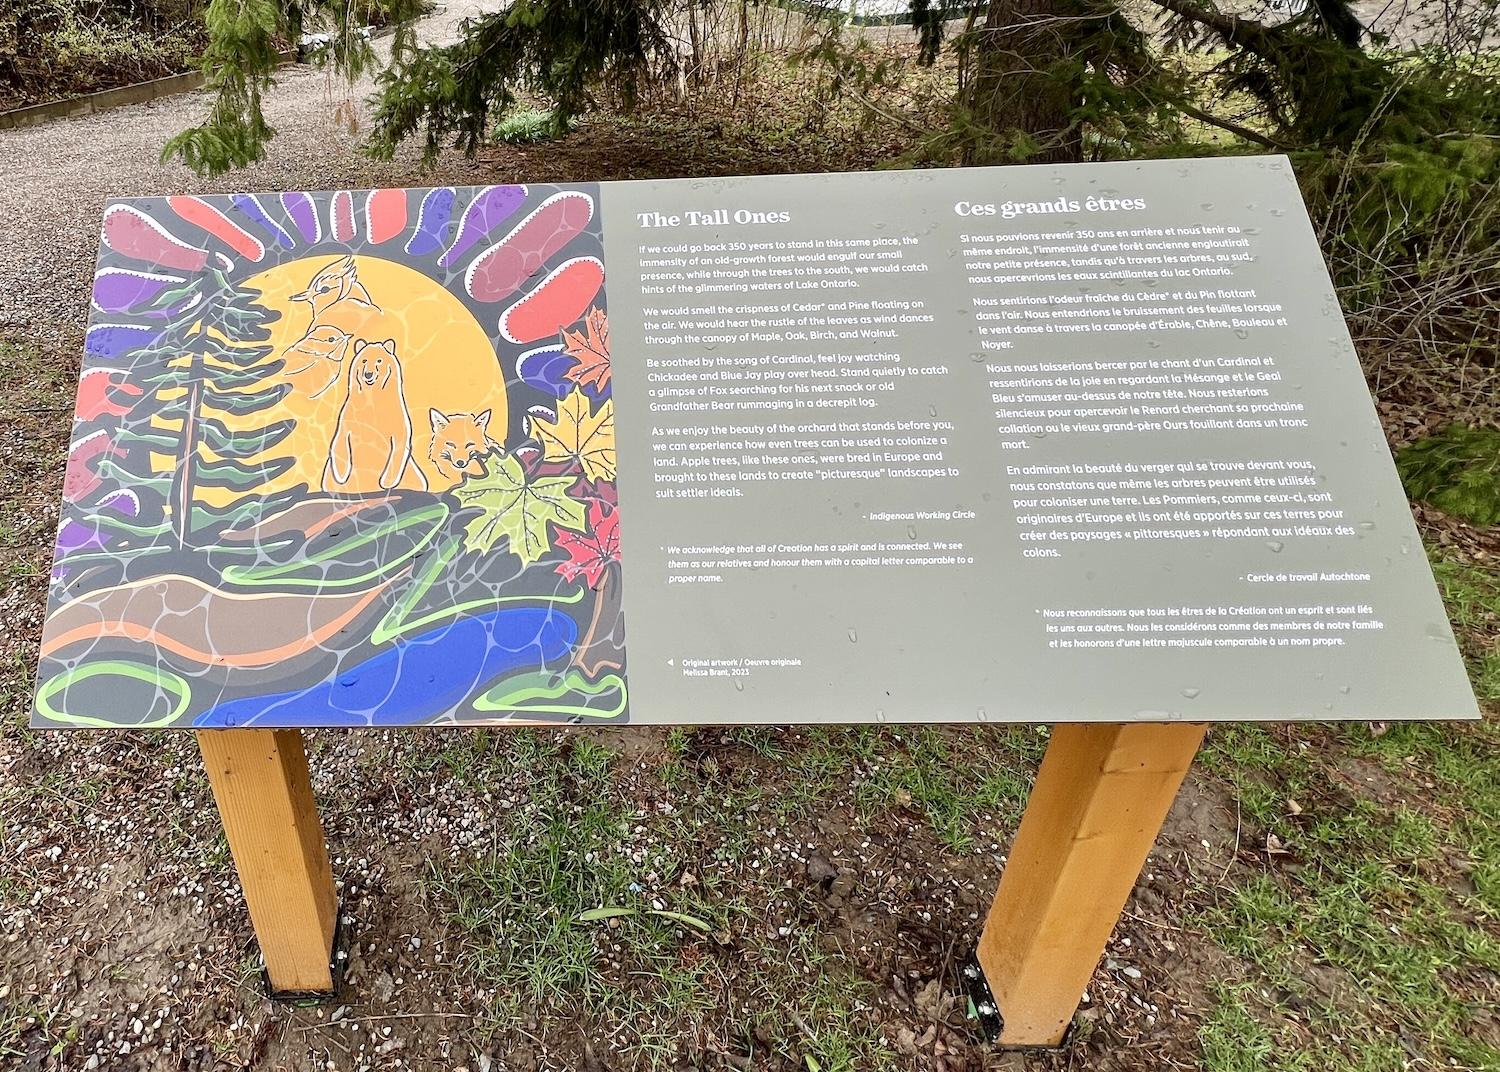 Tall Ones, by artist Melissa Brant, illustrates an interpretive sign about what the land was like here before it colonization.